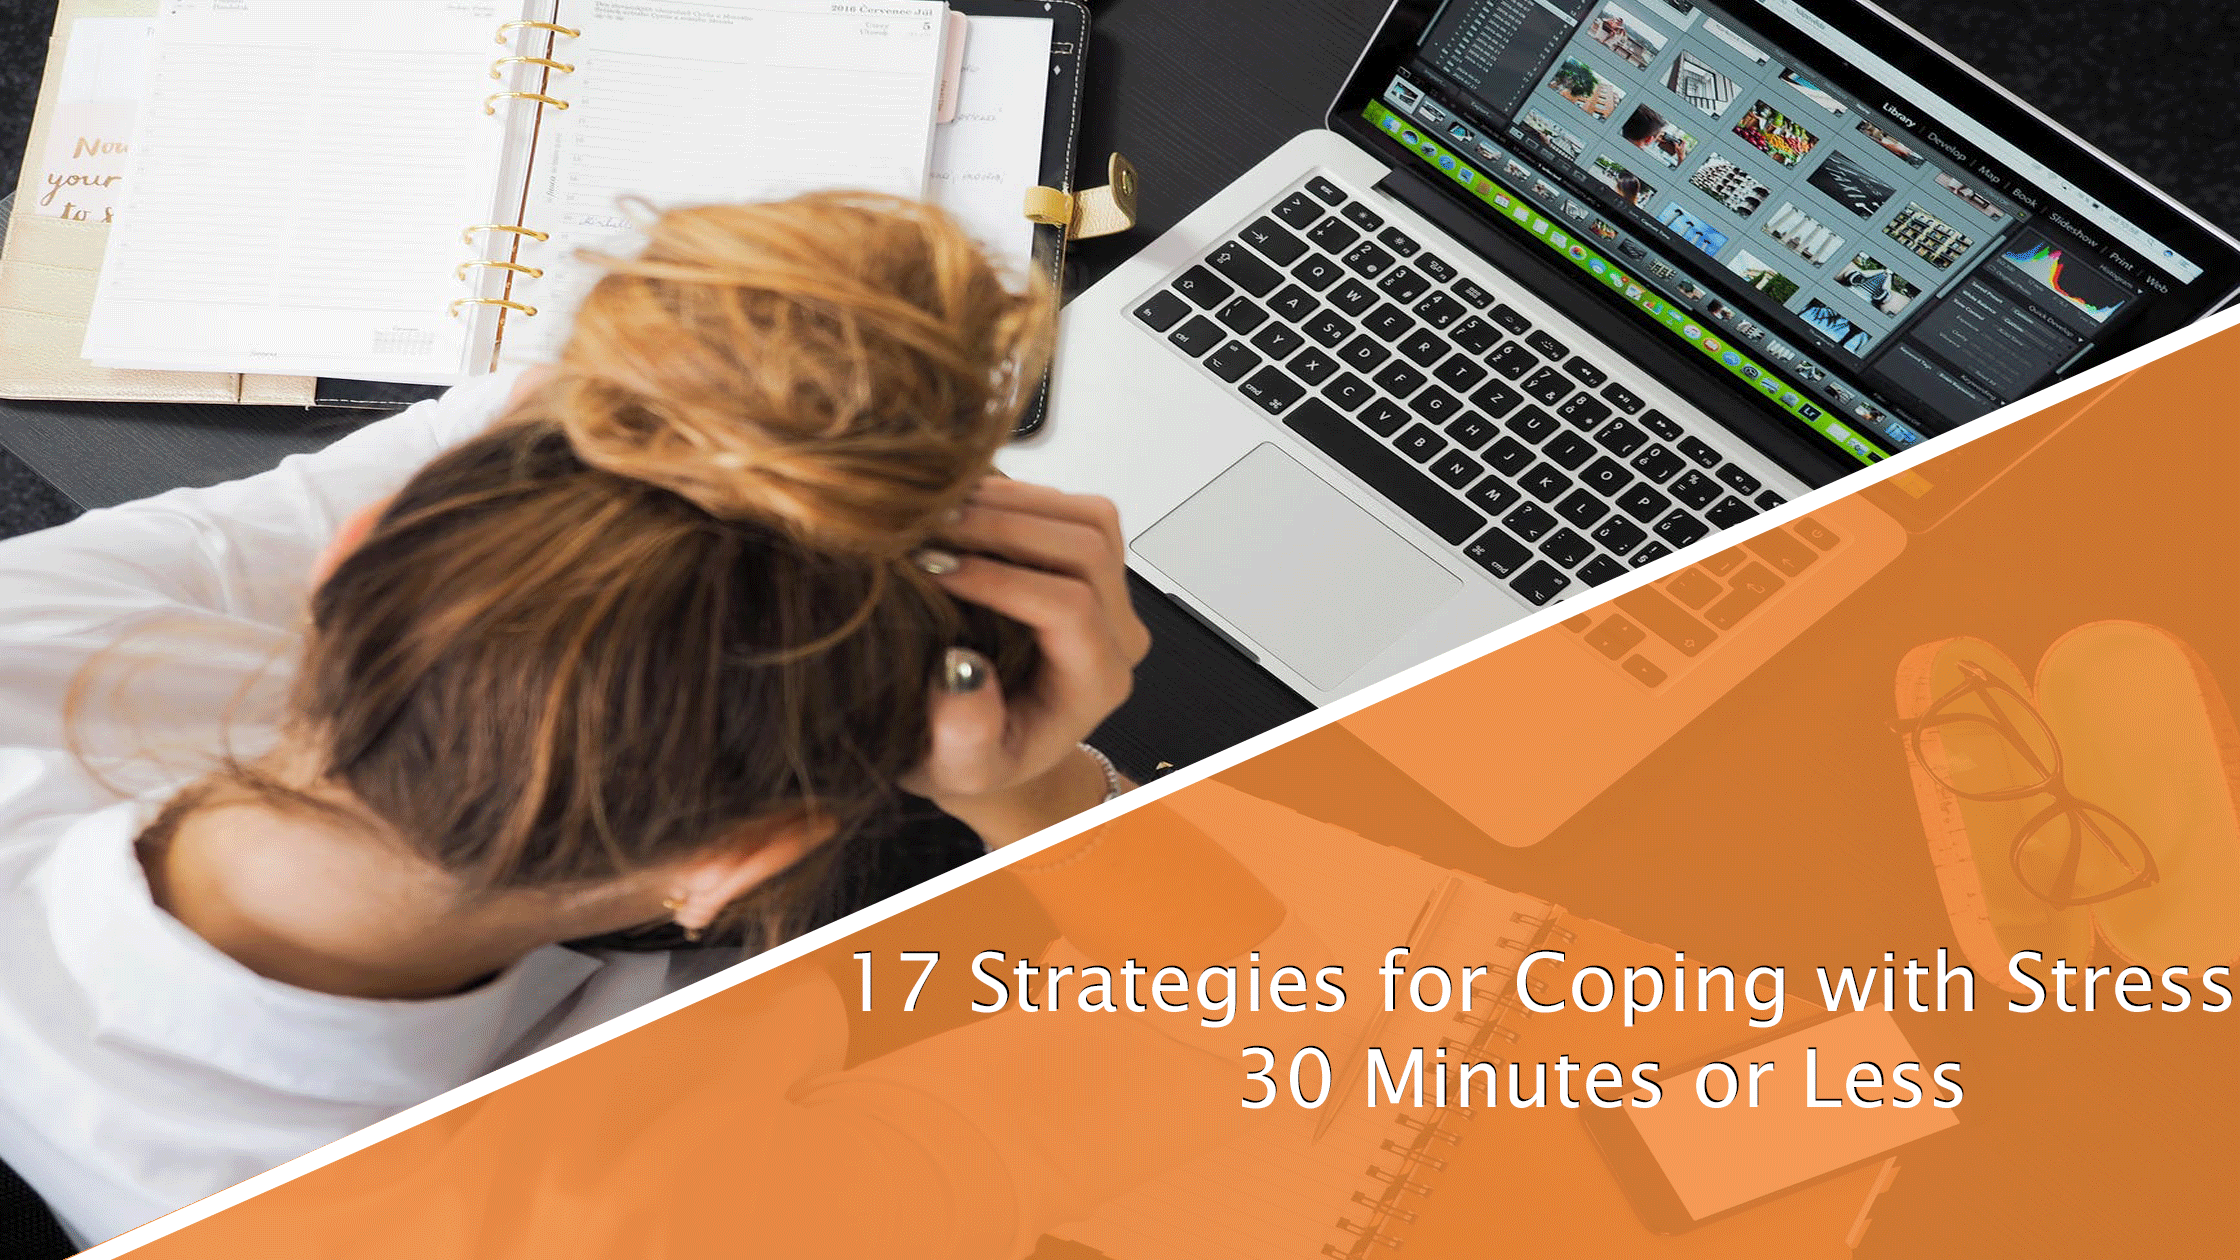 17 Strategies for Coping with Stress in 30 Minutes or Less